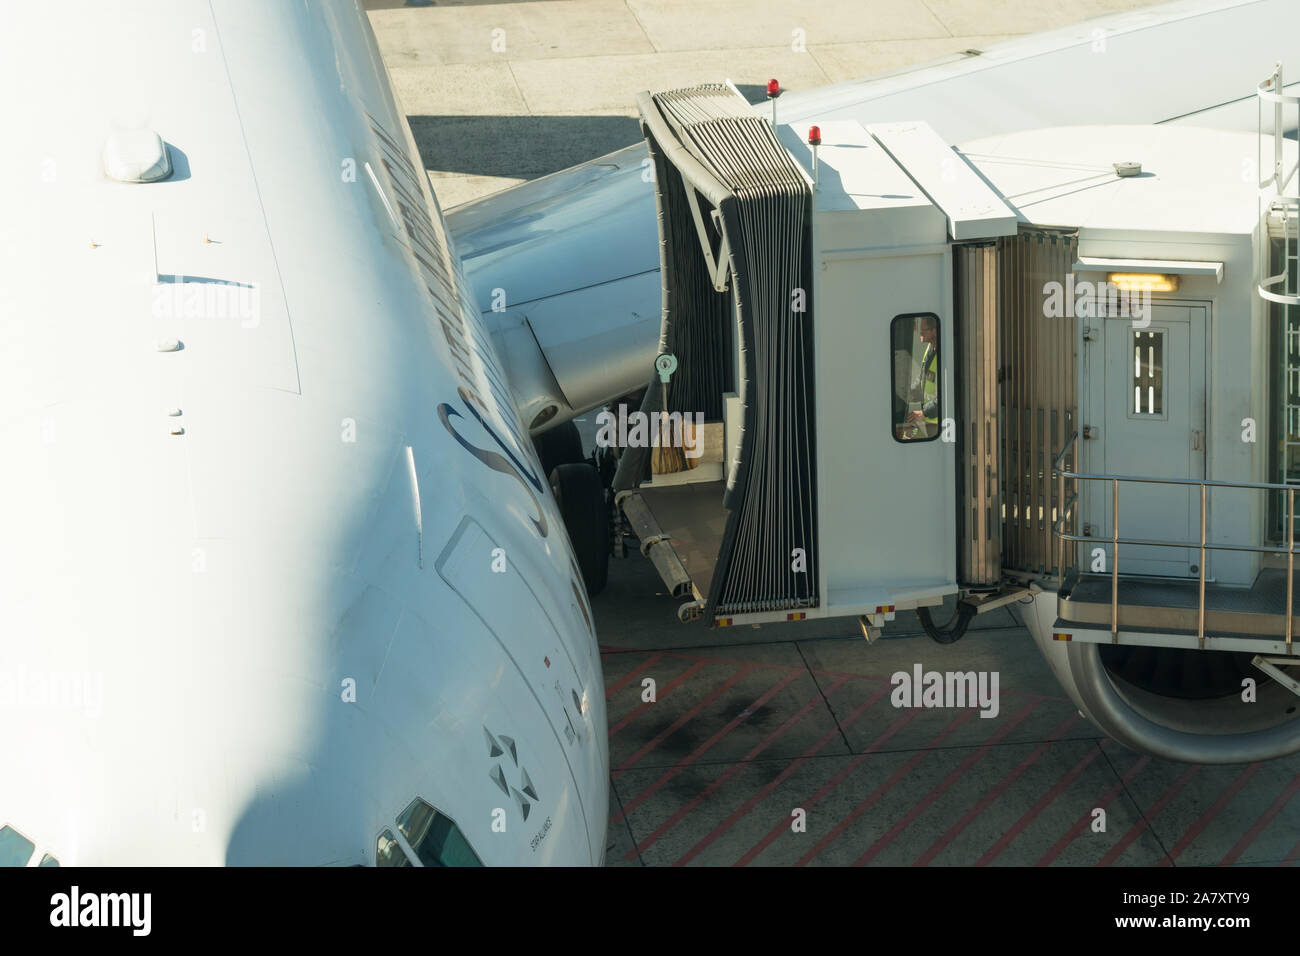 connecting or attaching a passenger boarding bridge or PBB to a door of a waiting airplane or aircraft on the tarmac at an airport Stock Photo